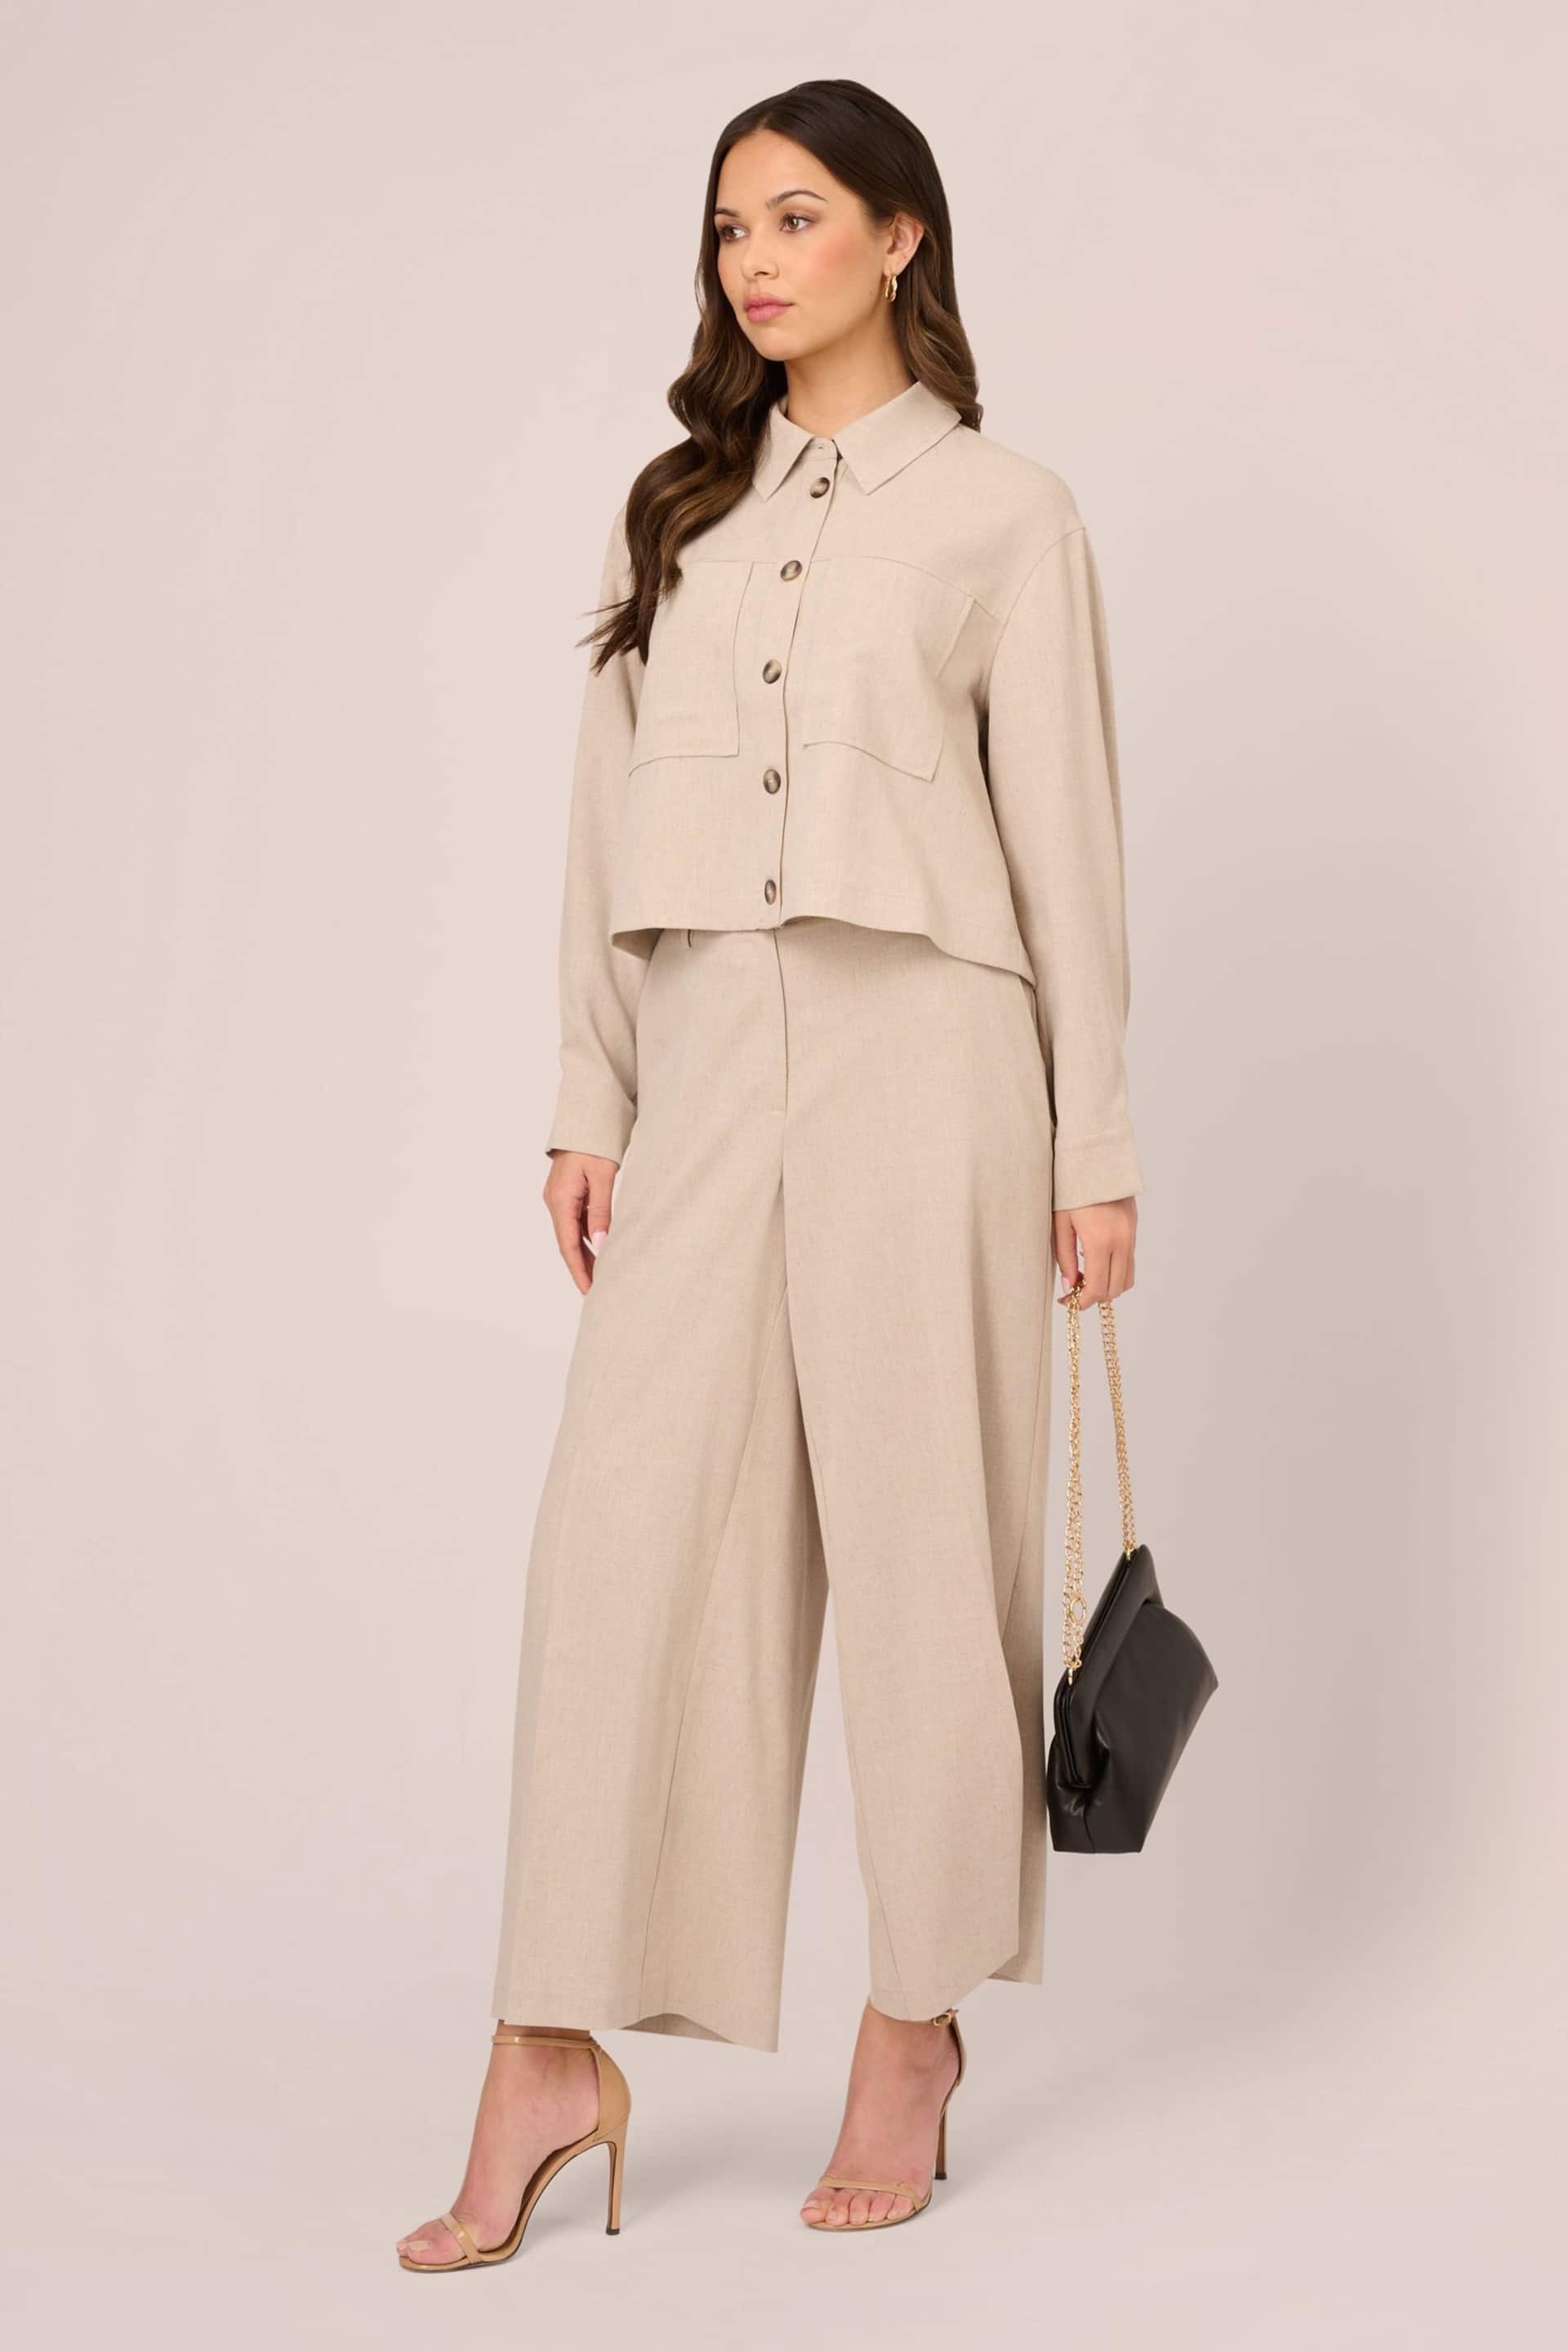 Adrianna Papell Natural Solid Long Sleeve Button Up Utility Unlined Jacket - Image 3 of 7